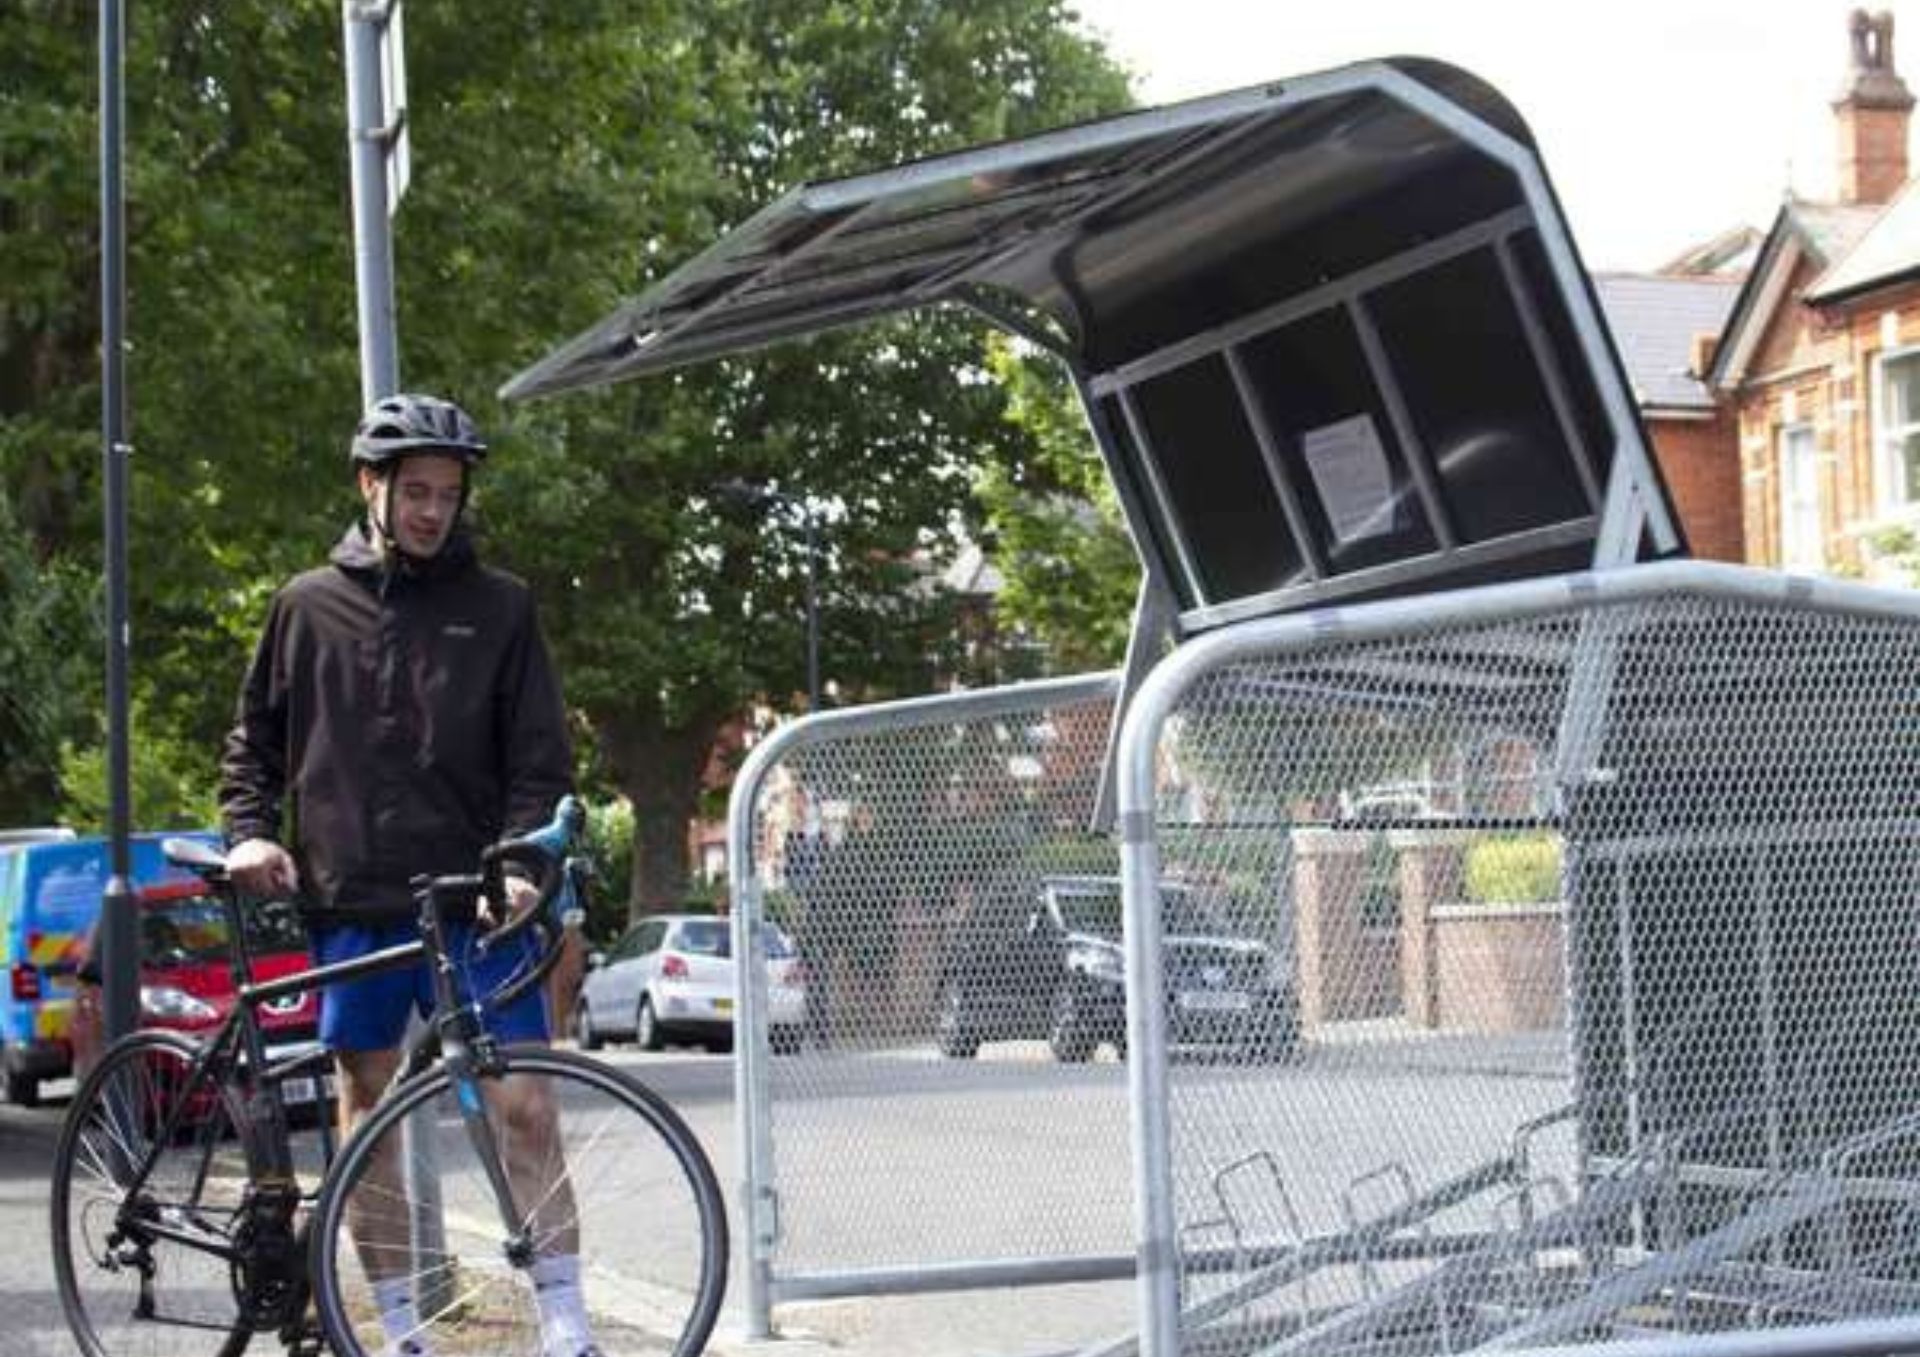 photo of a man with a bike standing next to an open cycle hangar